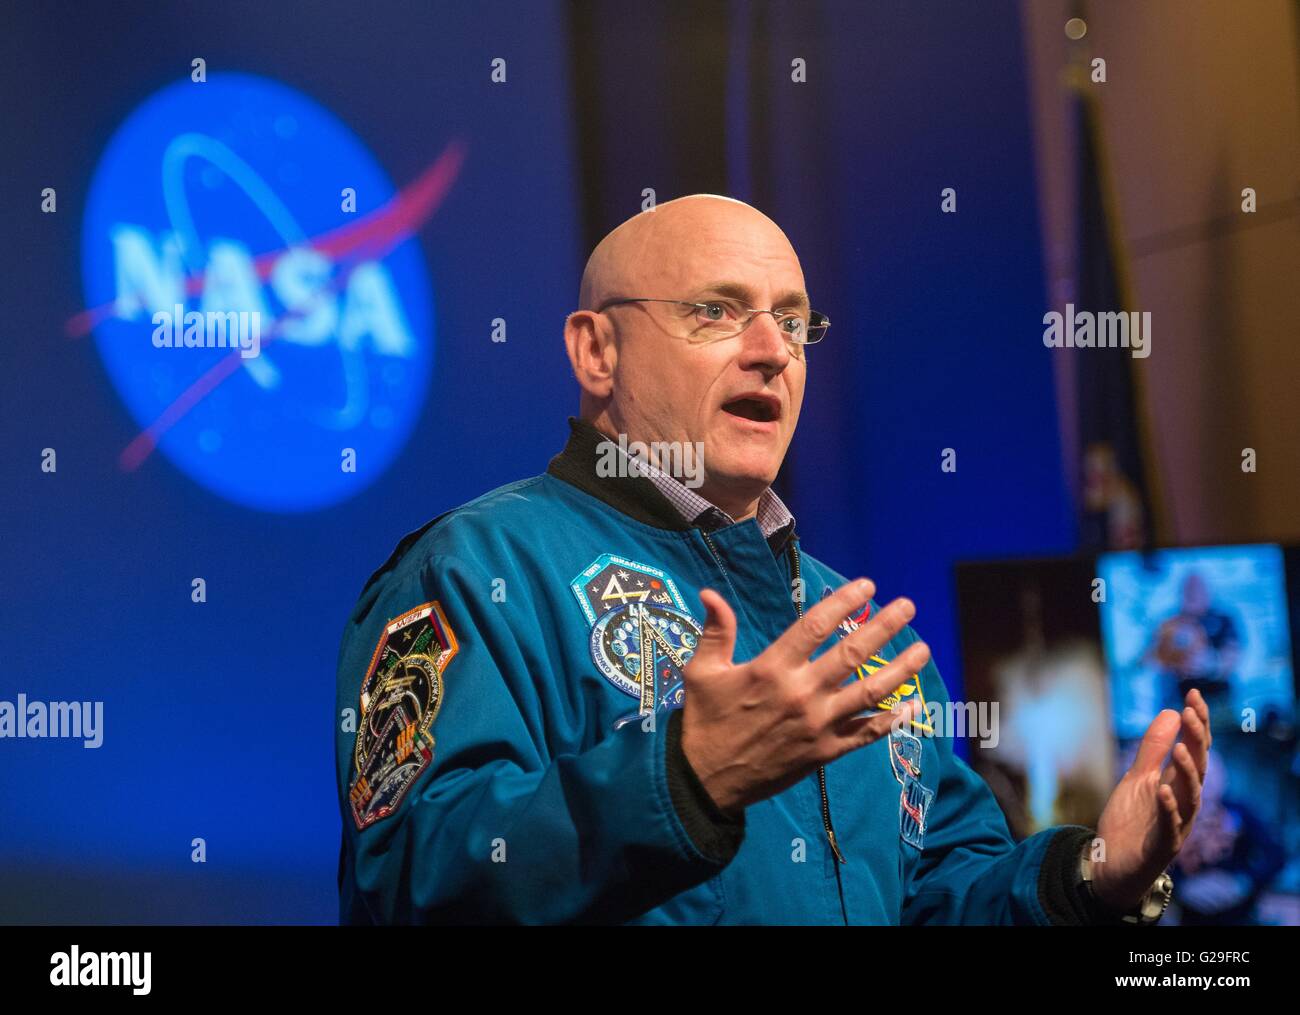 Former NASA astronaut Scott Kelly speaks about his time living and working aboard the International Space Station during an agency wide all-hands event at NASA Headquarters May 25, 2016 in Washington, DC. Kelly is the first American to spend 1-year in space aboard the International Space Station. Stock Photo